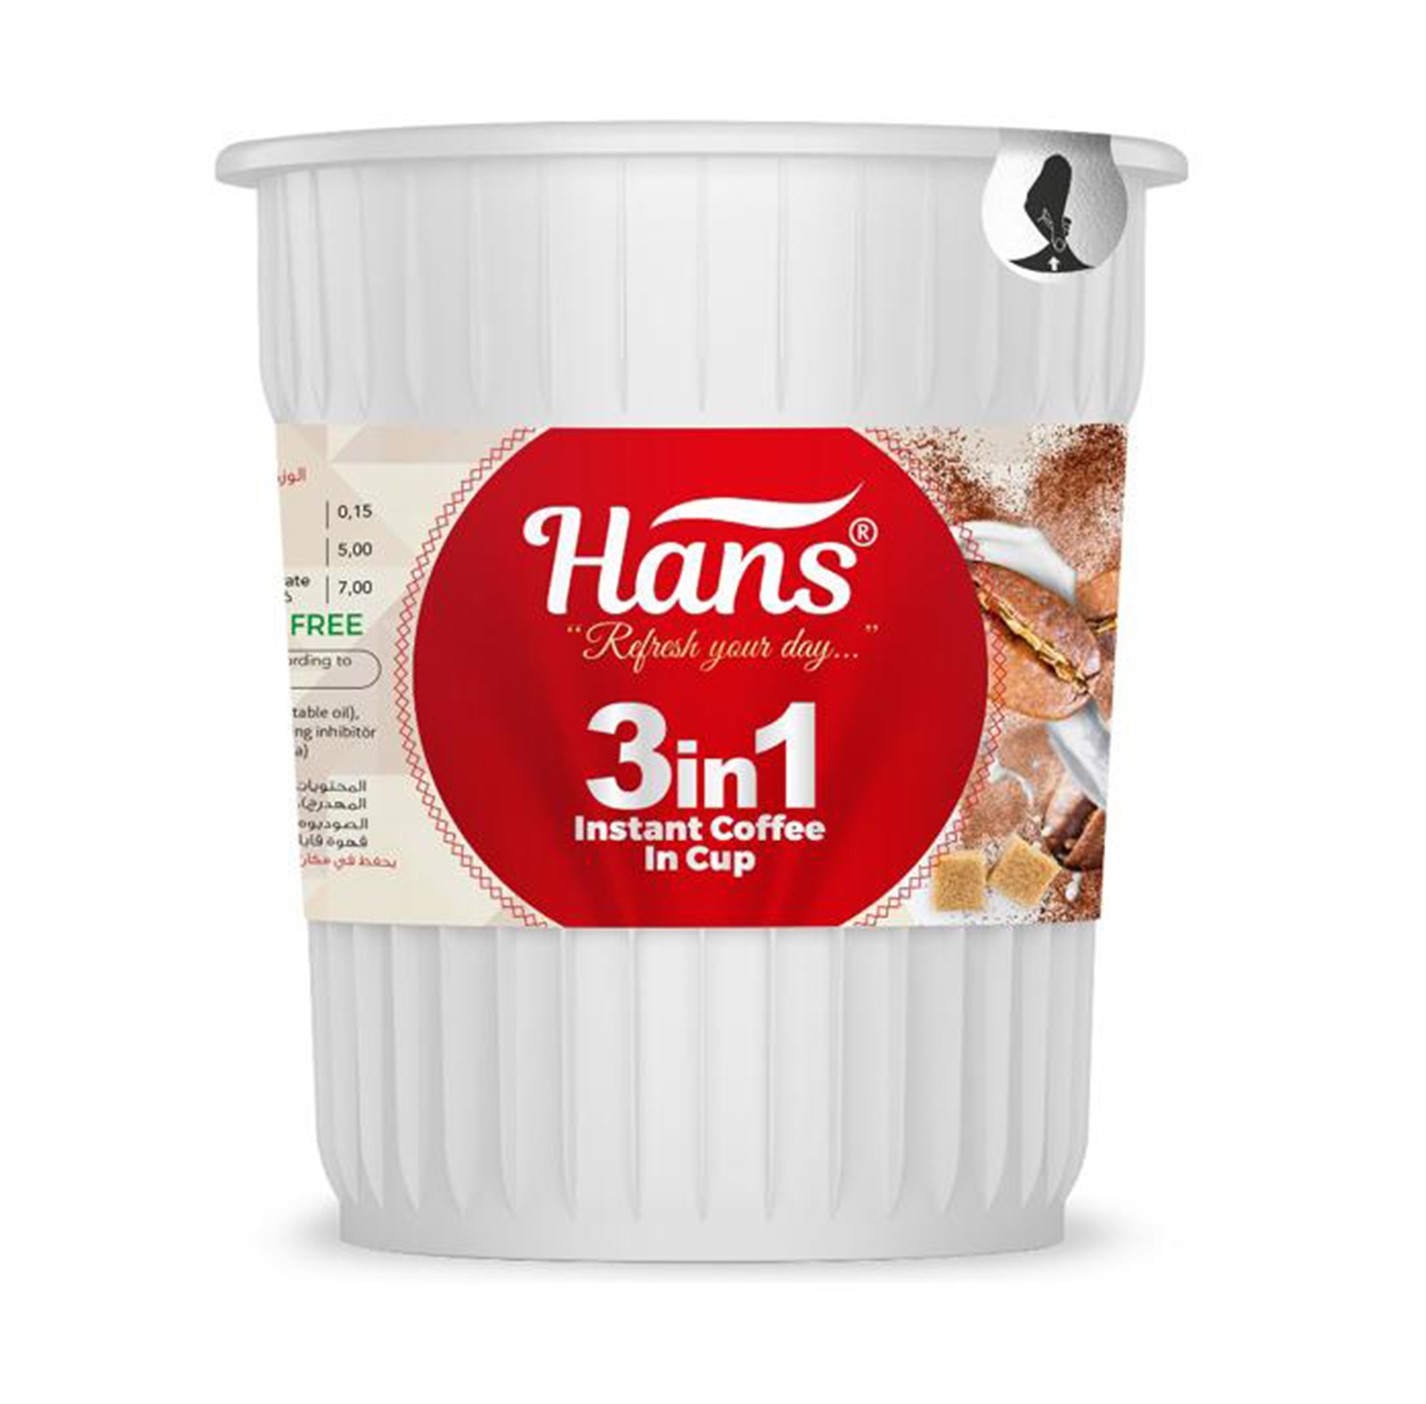 Hans 3in1 Instant Coffee In Cup 6 Piece